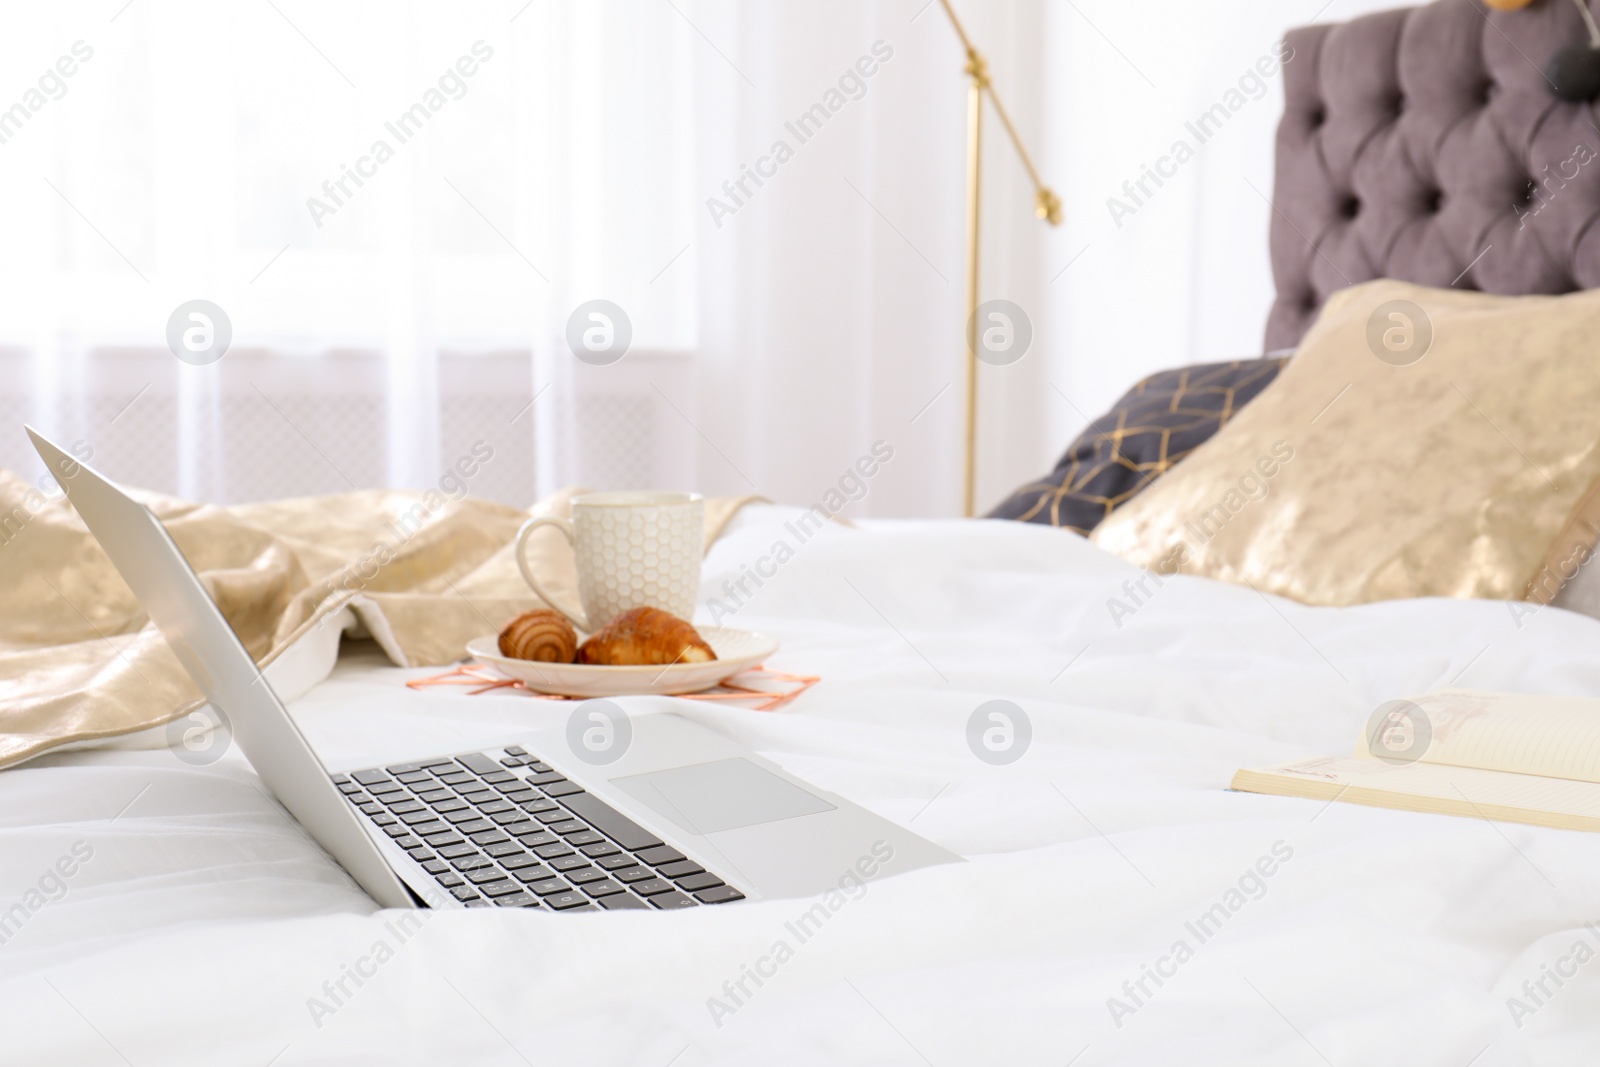 Photo of Laptop and breakfast on bed in stylish room interior